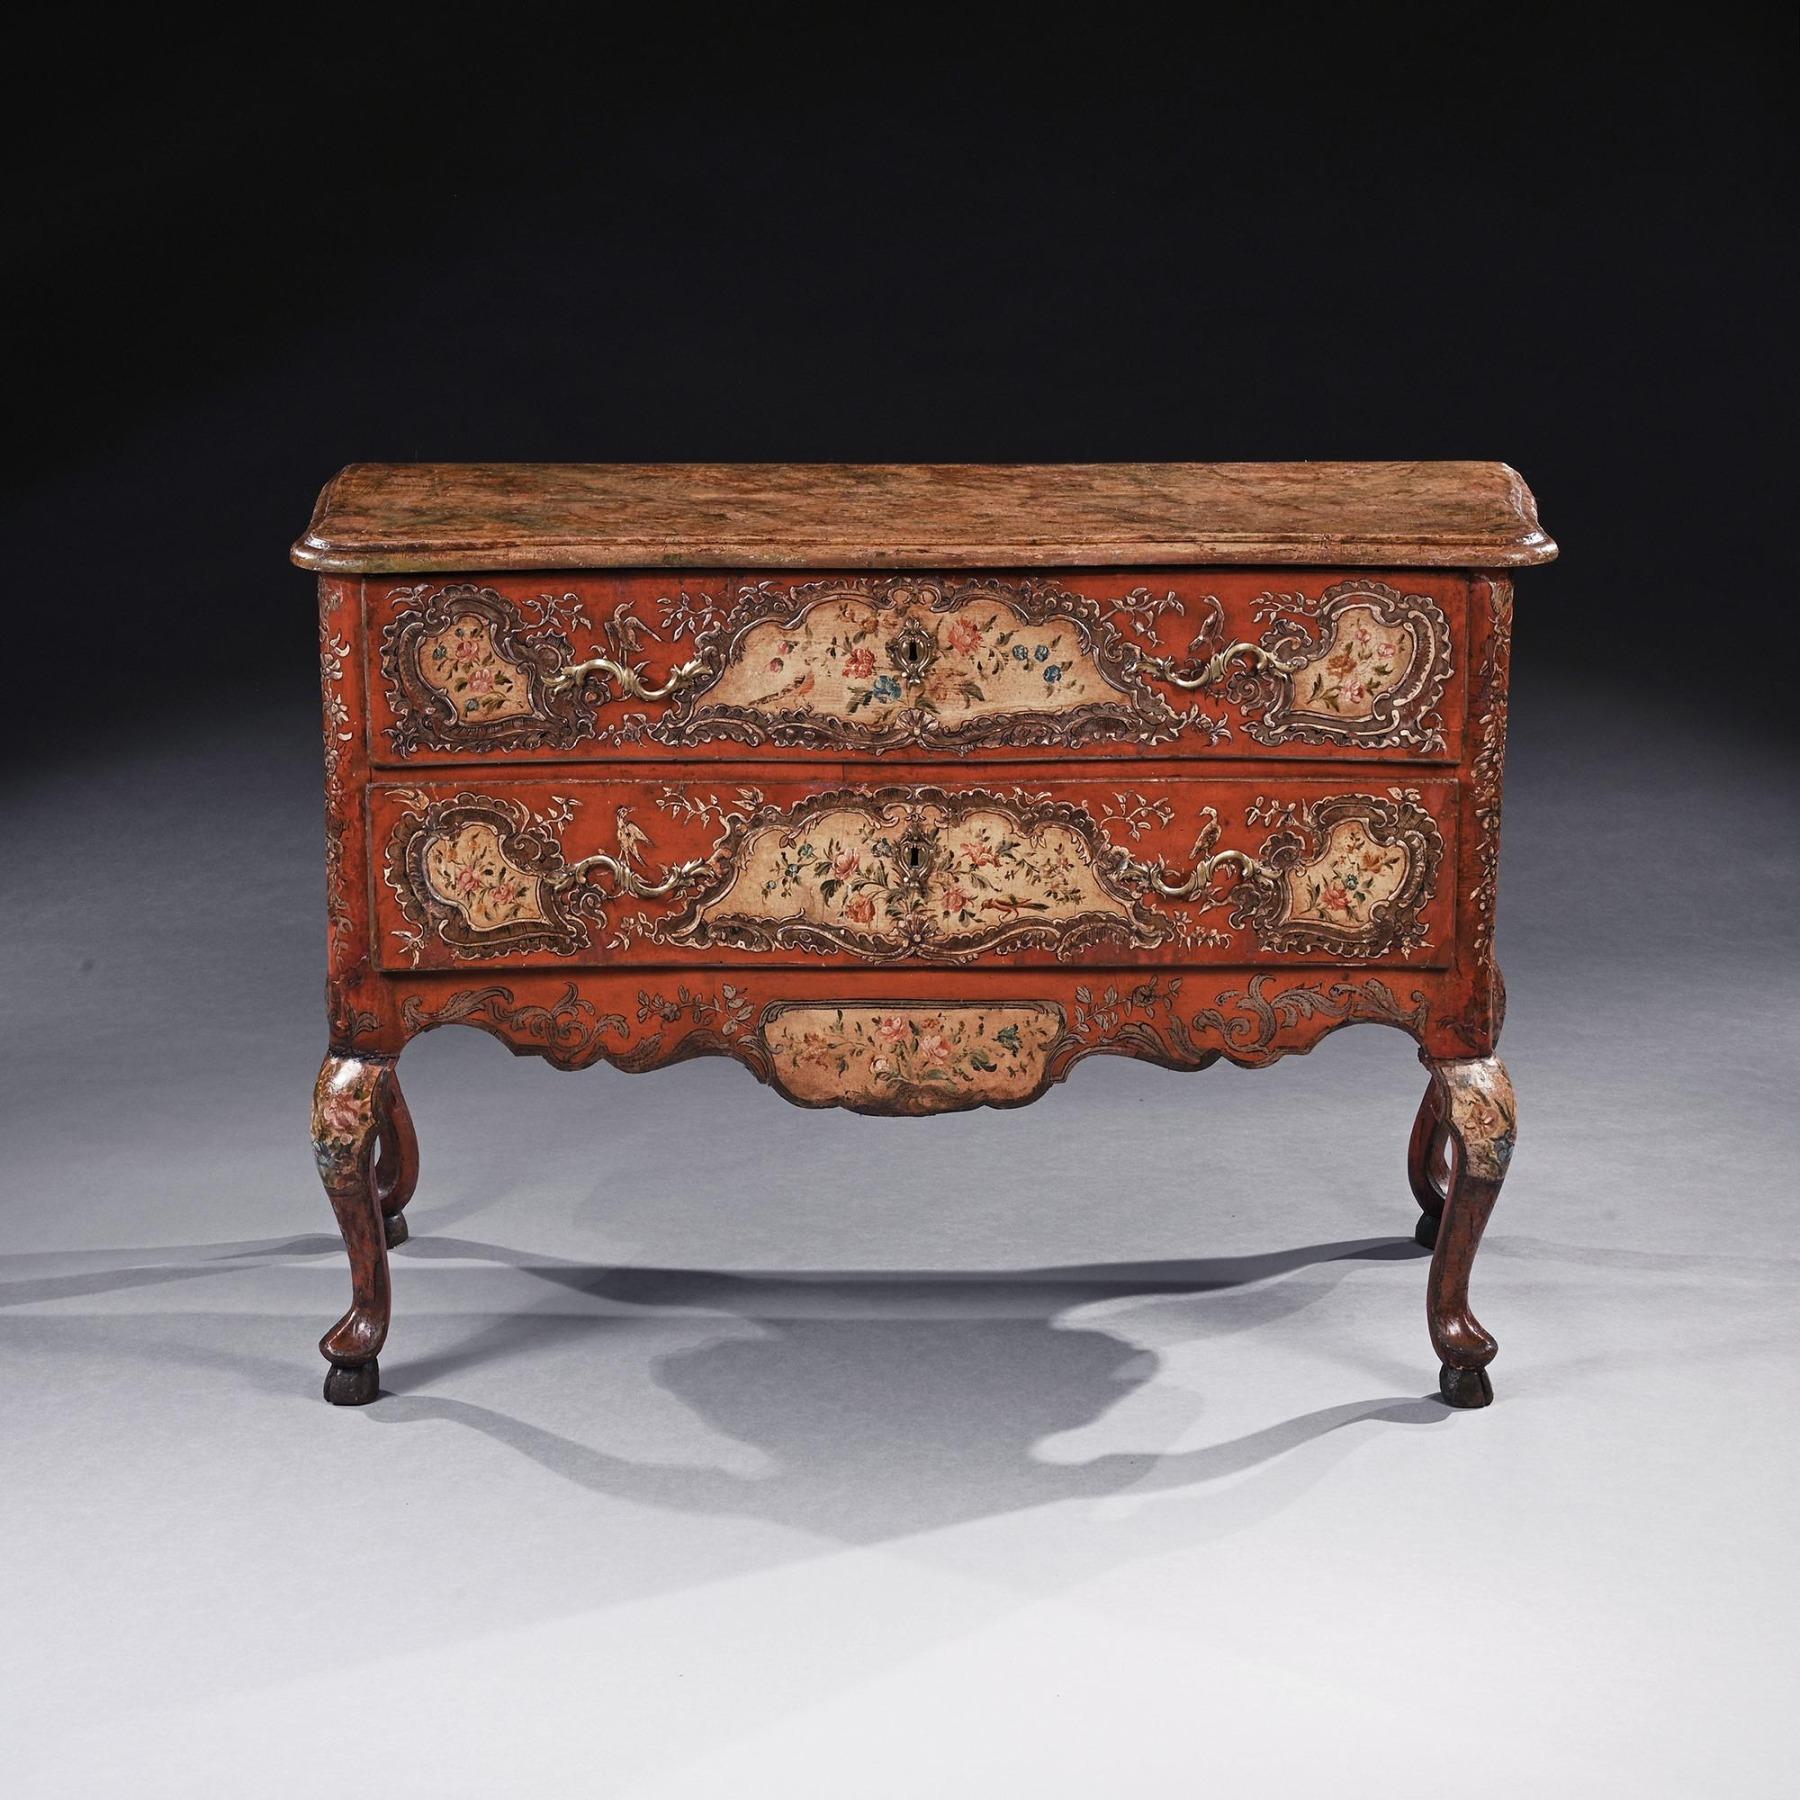 A very rare 18th century Sicilian Rococo Polychrome Painted and Parcel Gilt Serpentine Commode.

Italy Sicily circa 1750-70 

Of wonderful colour having a serpentine moulded simulated marble top above two long drawers decorated with flower and